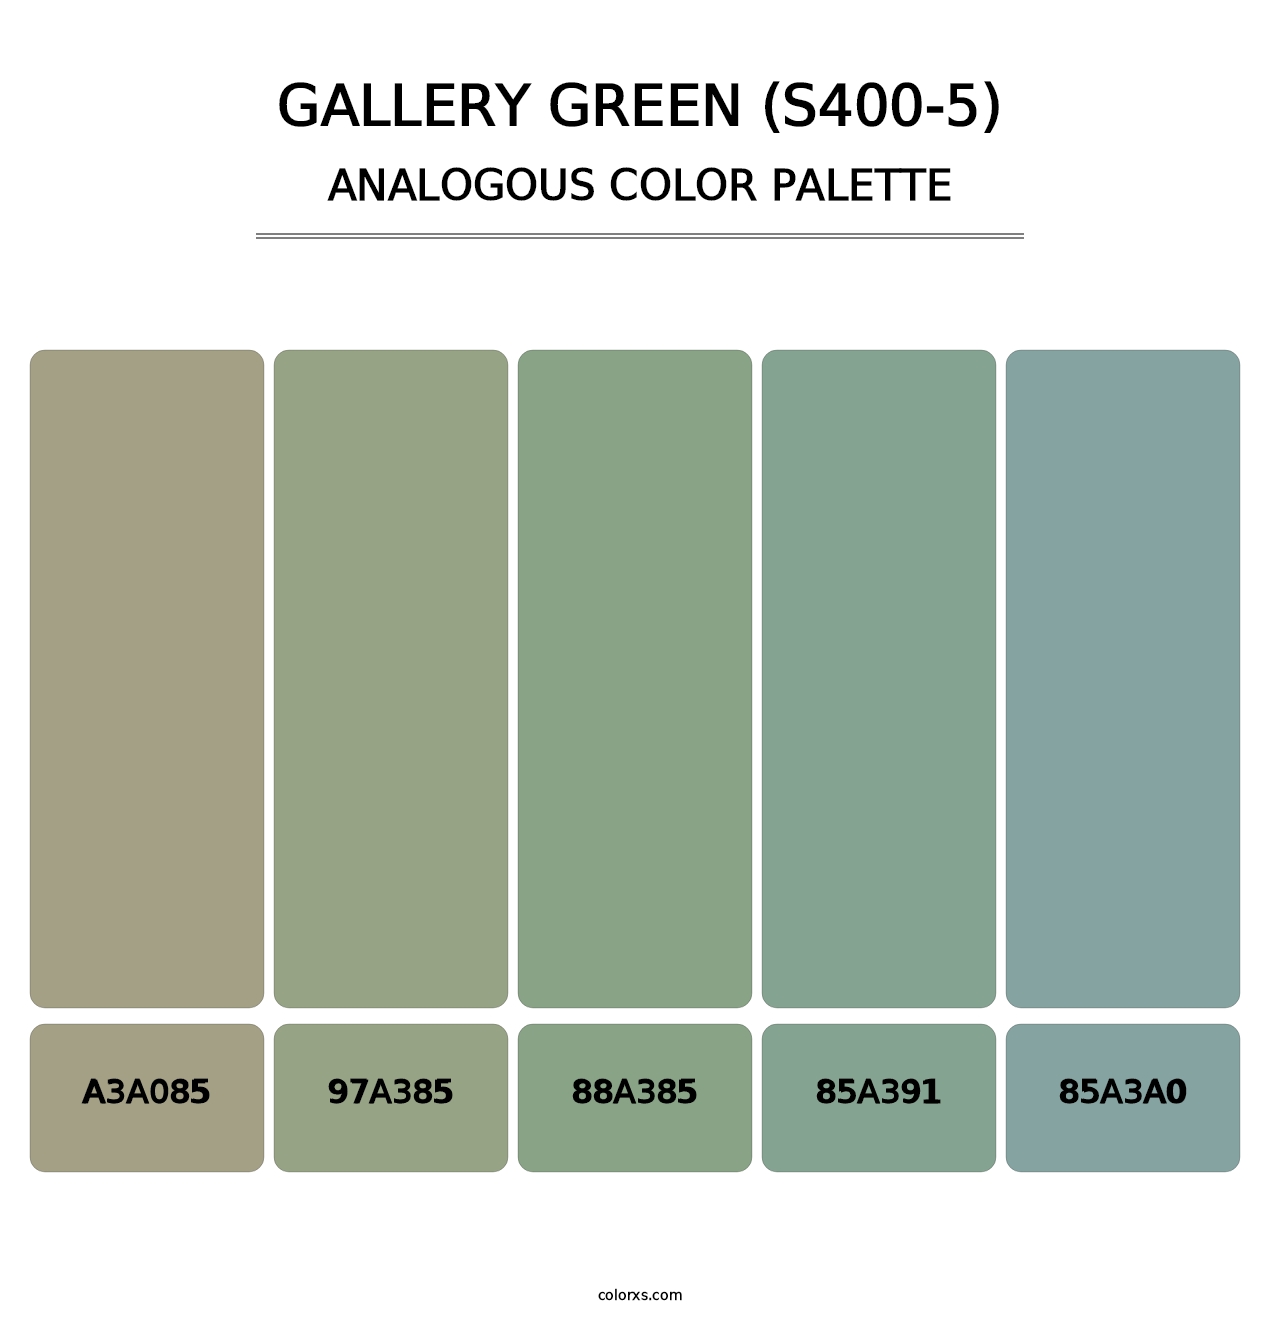 Gallery Green (S400-5) - Analogous Color Palette